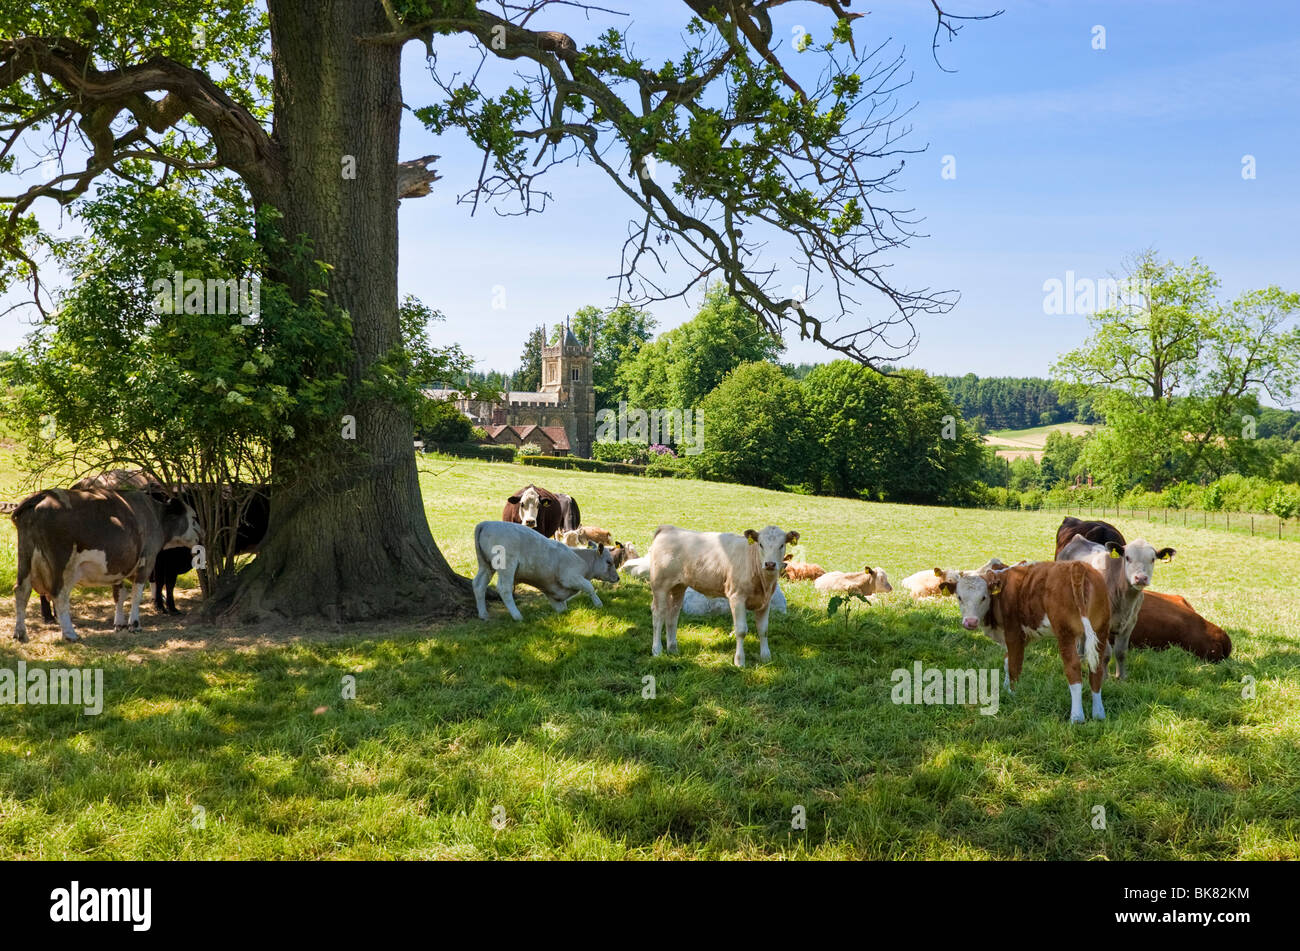 Surrey, England, UK - Dairy cows shading from the summer sun near Albury with church in the background Stock Photo